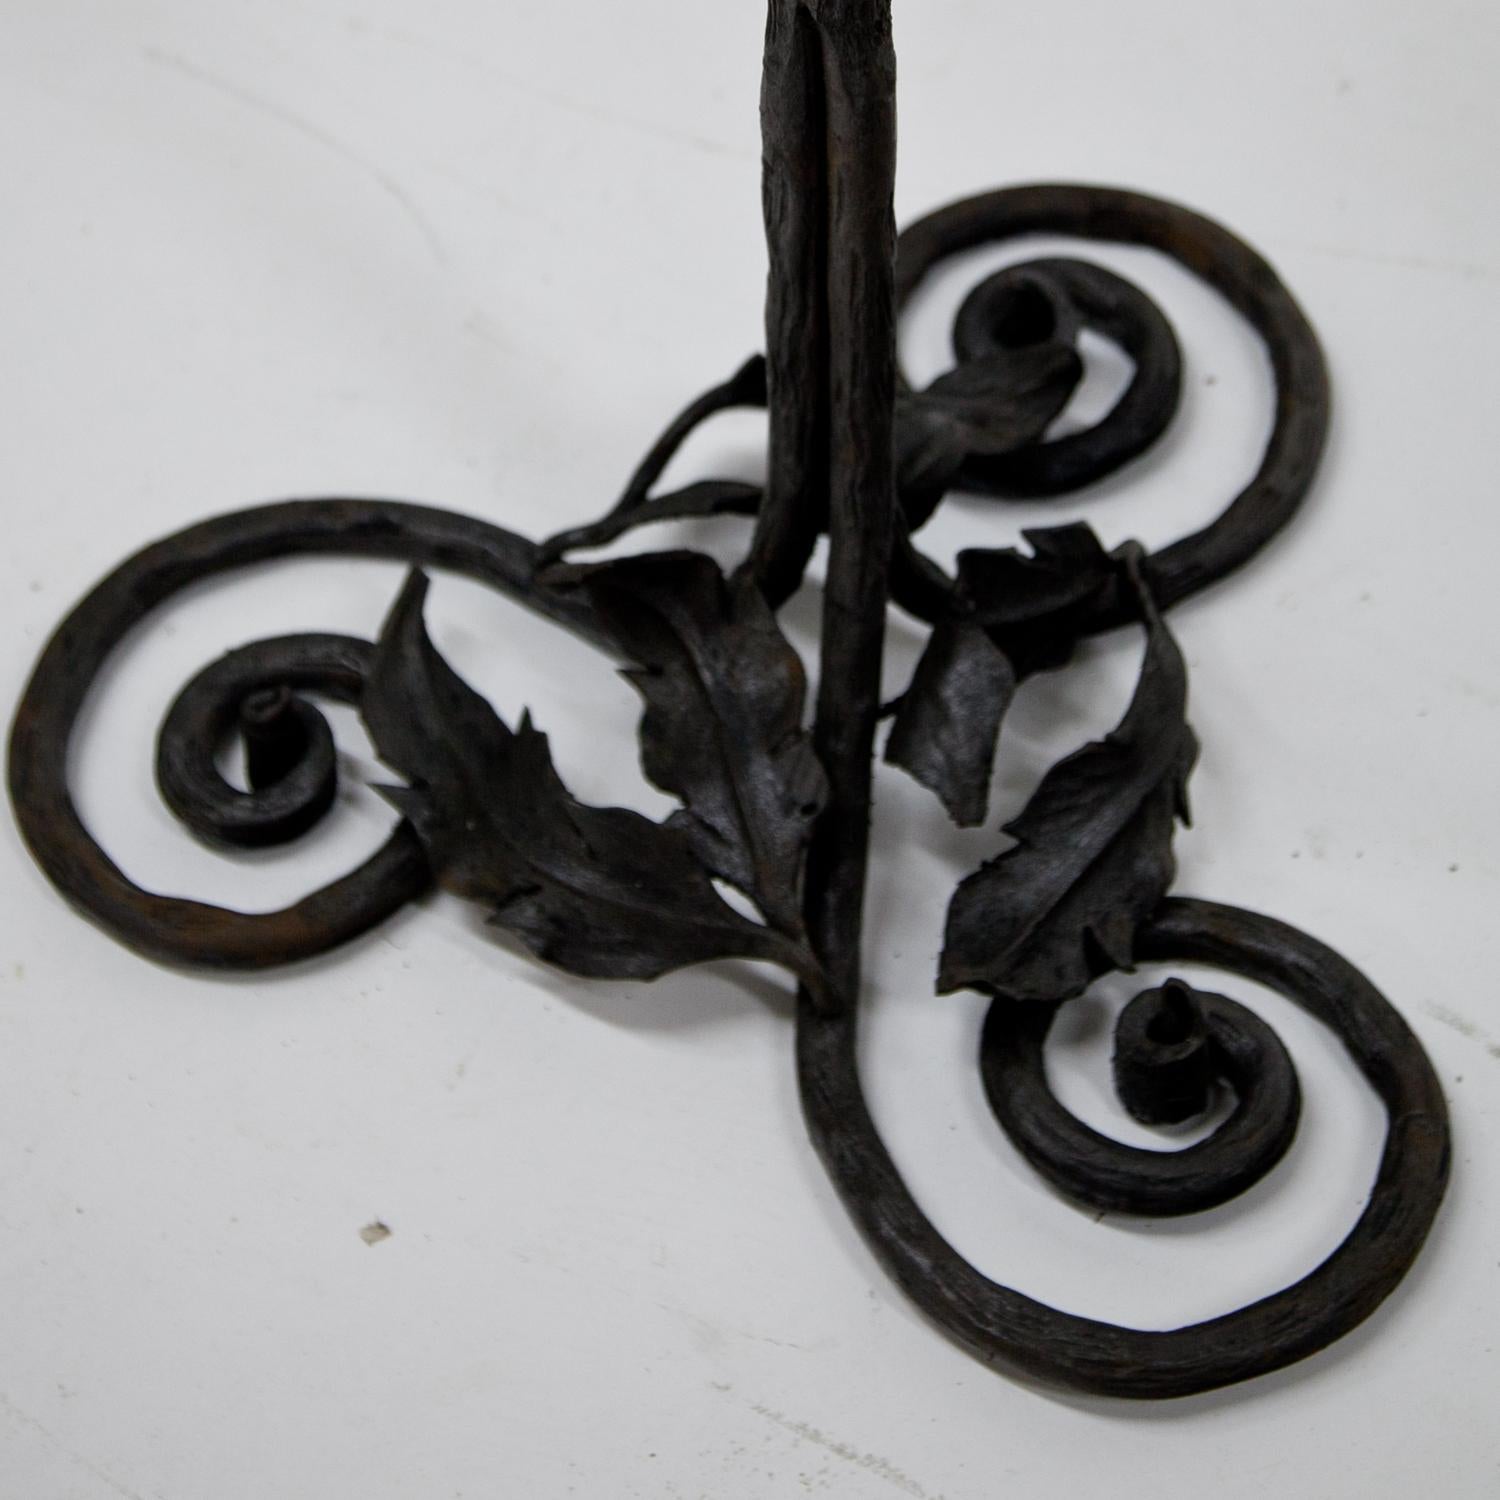 Wrought Iron Candlestick Attributed to Alessandro Mazzucotelli, Italy (Art nouveau)